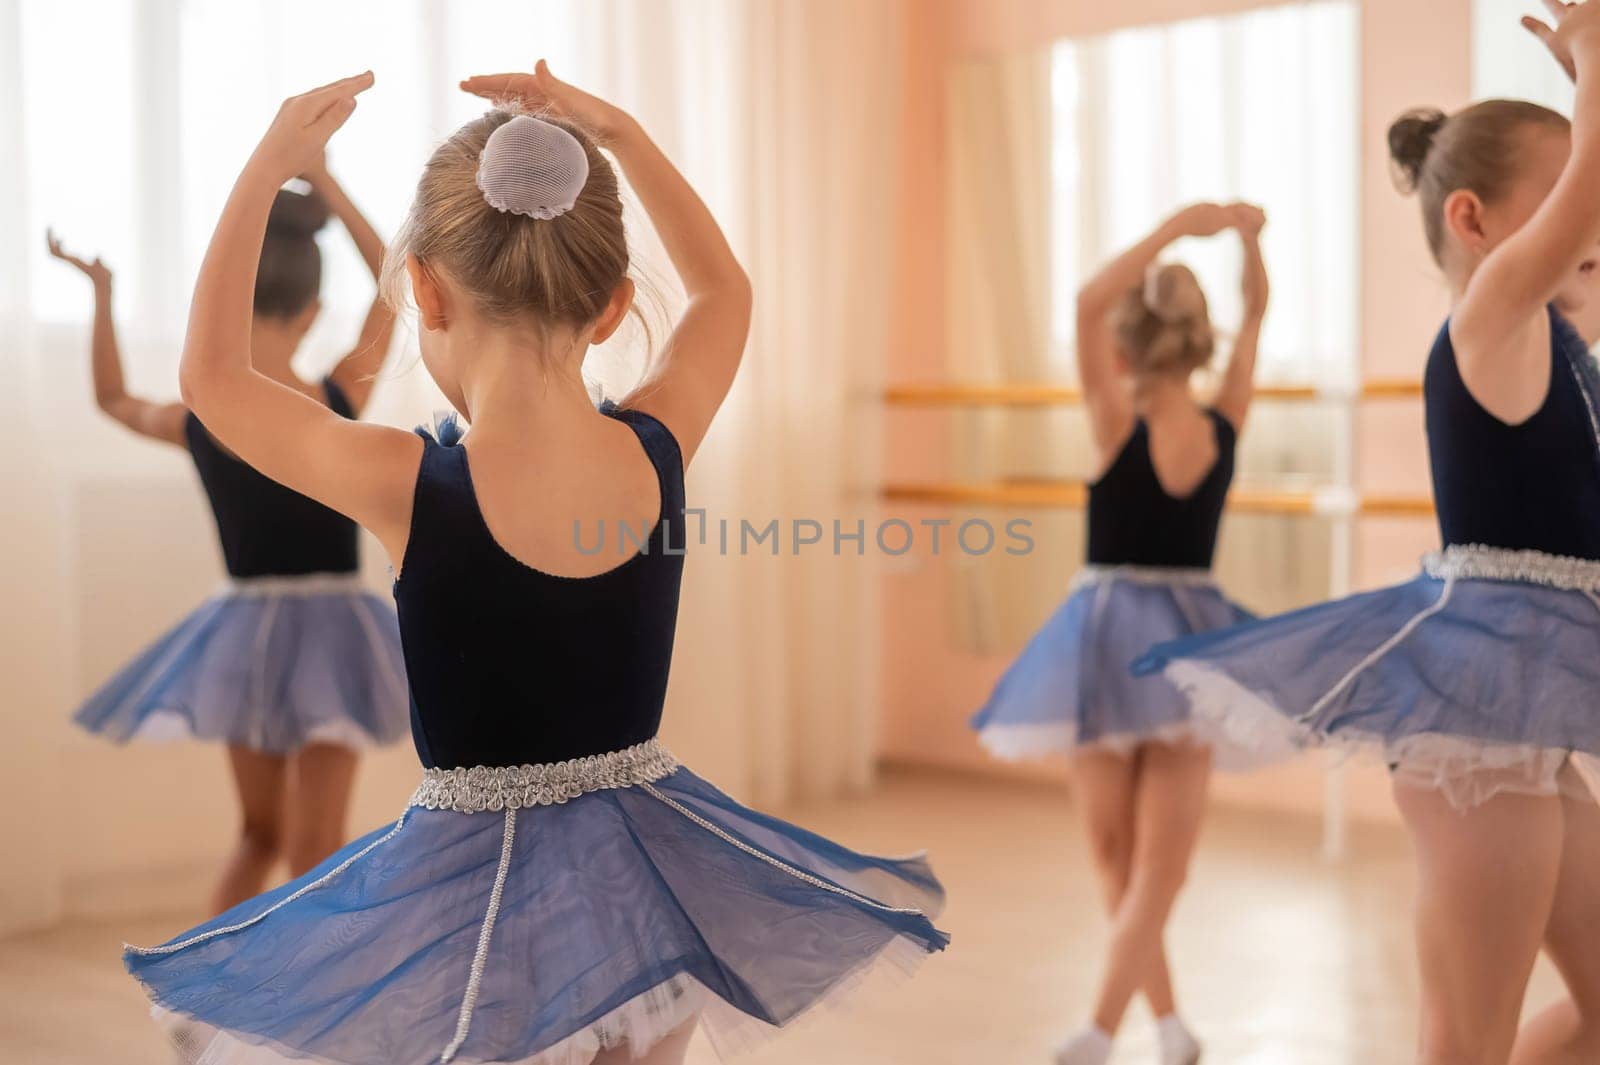 Little ballerinas perform at a dance school. by mrwed54